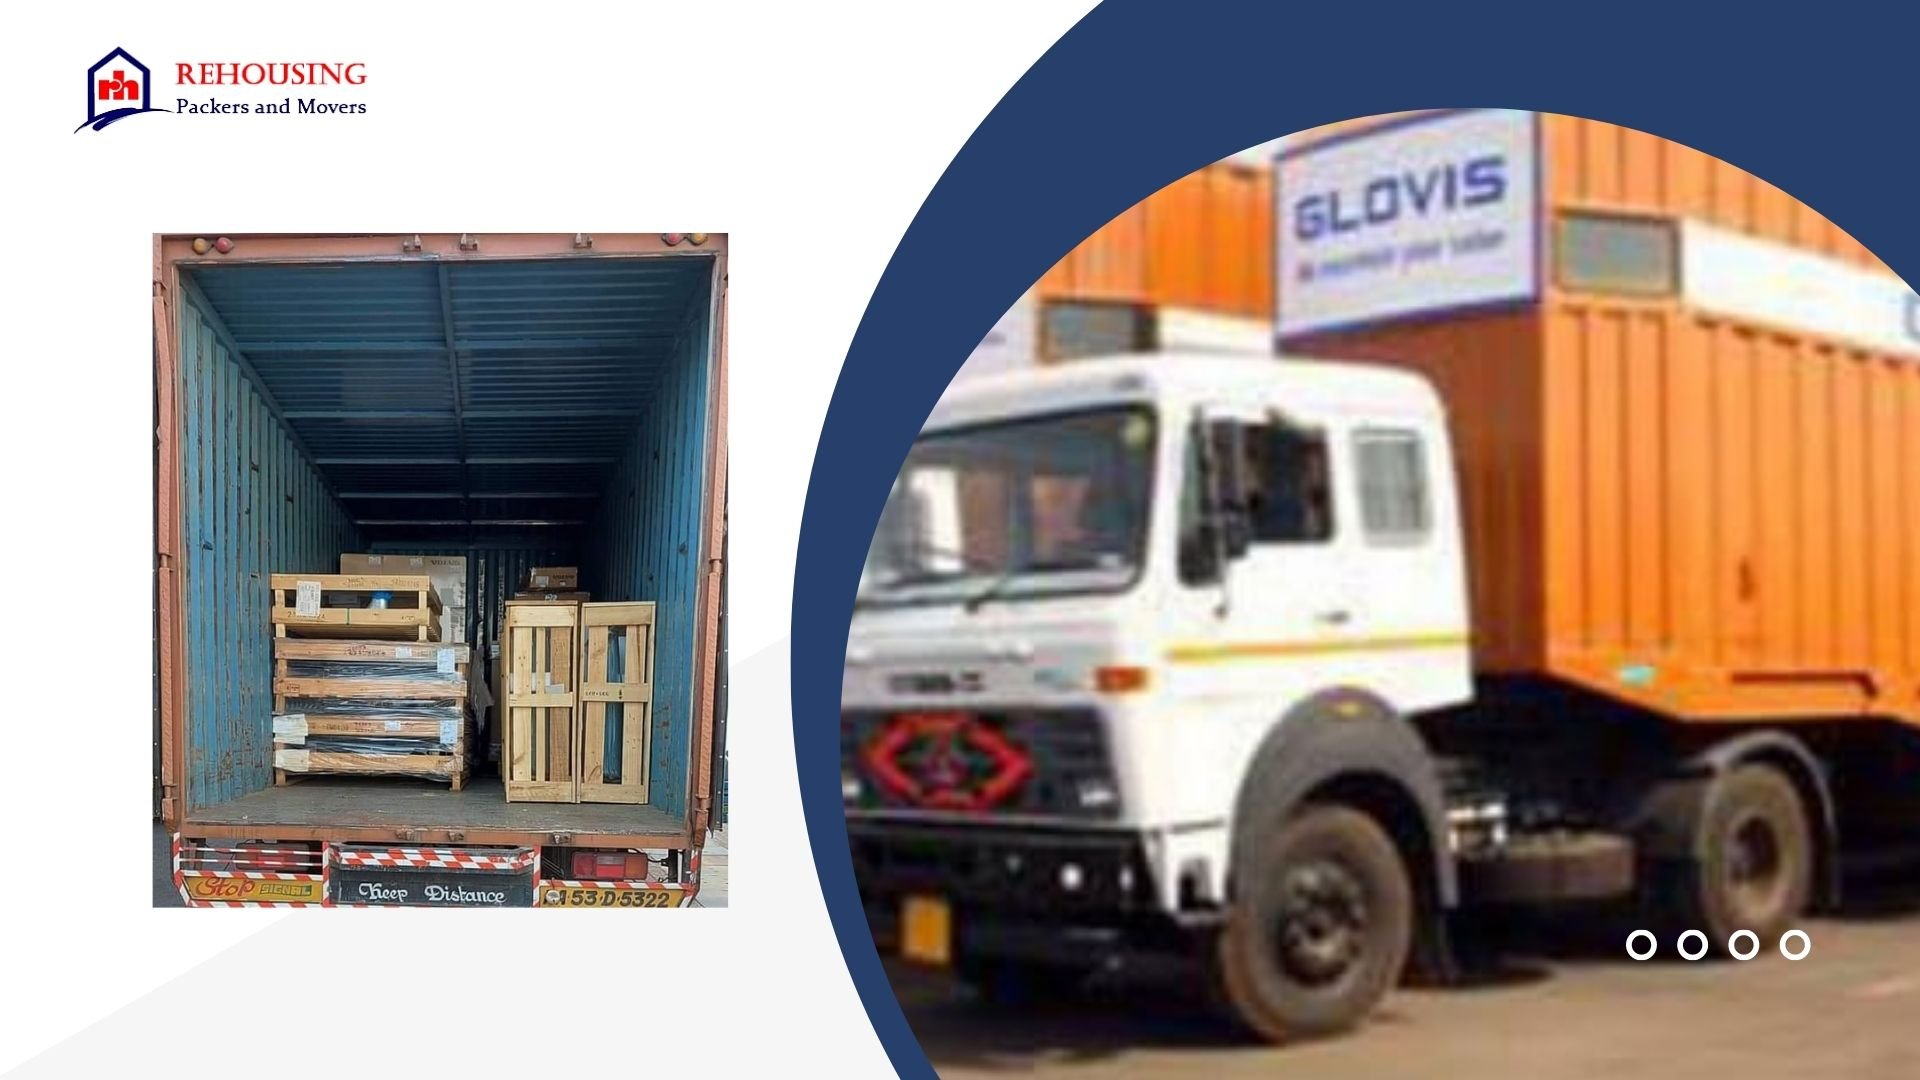 Packers and Movers From Dehradun to Pune | Rehousing packers and movers